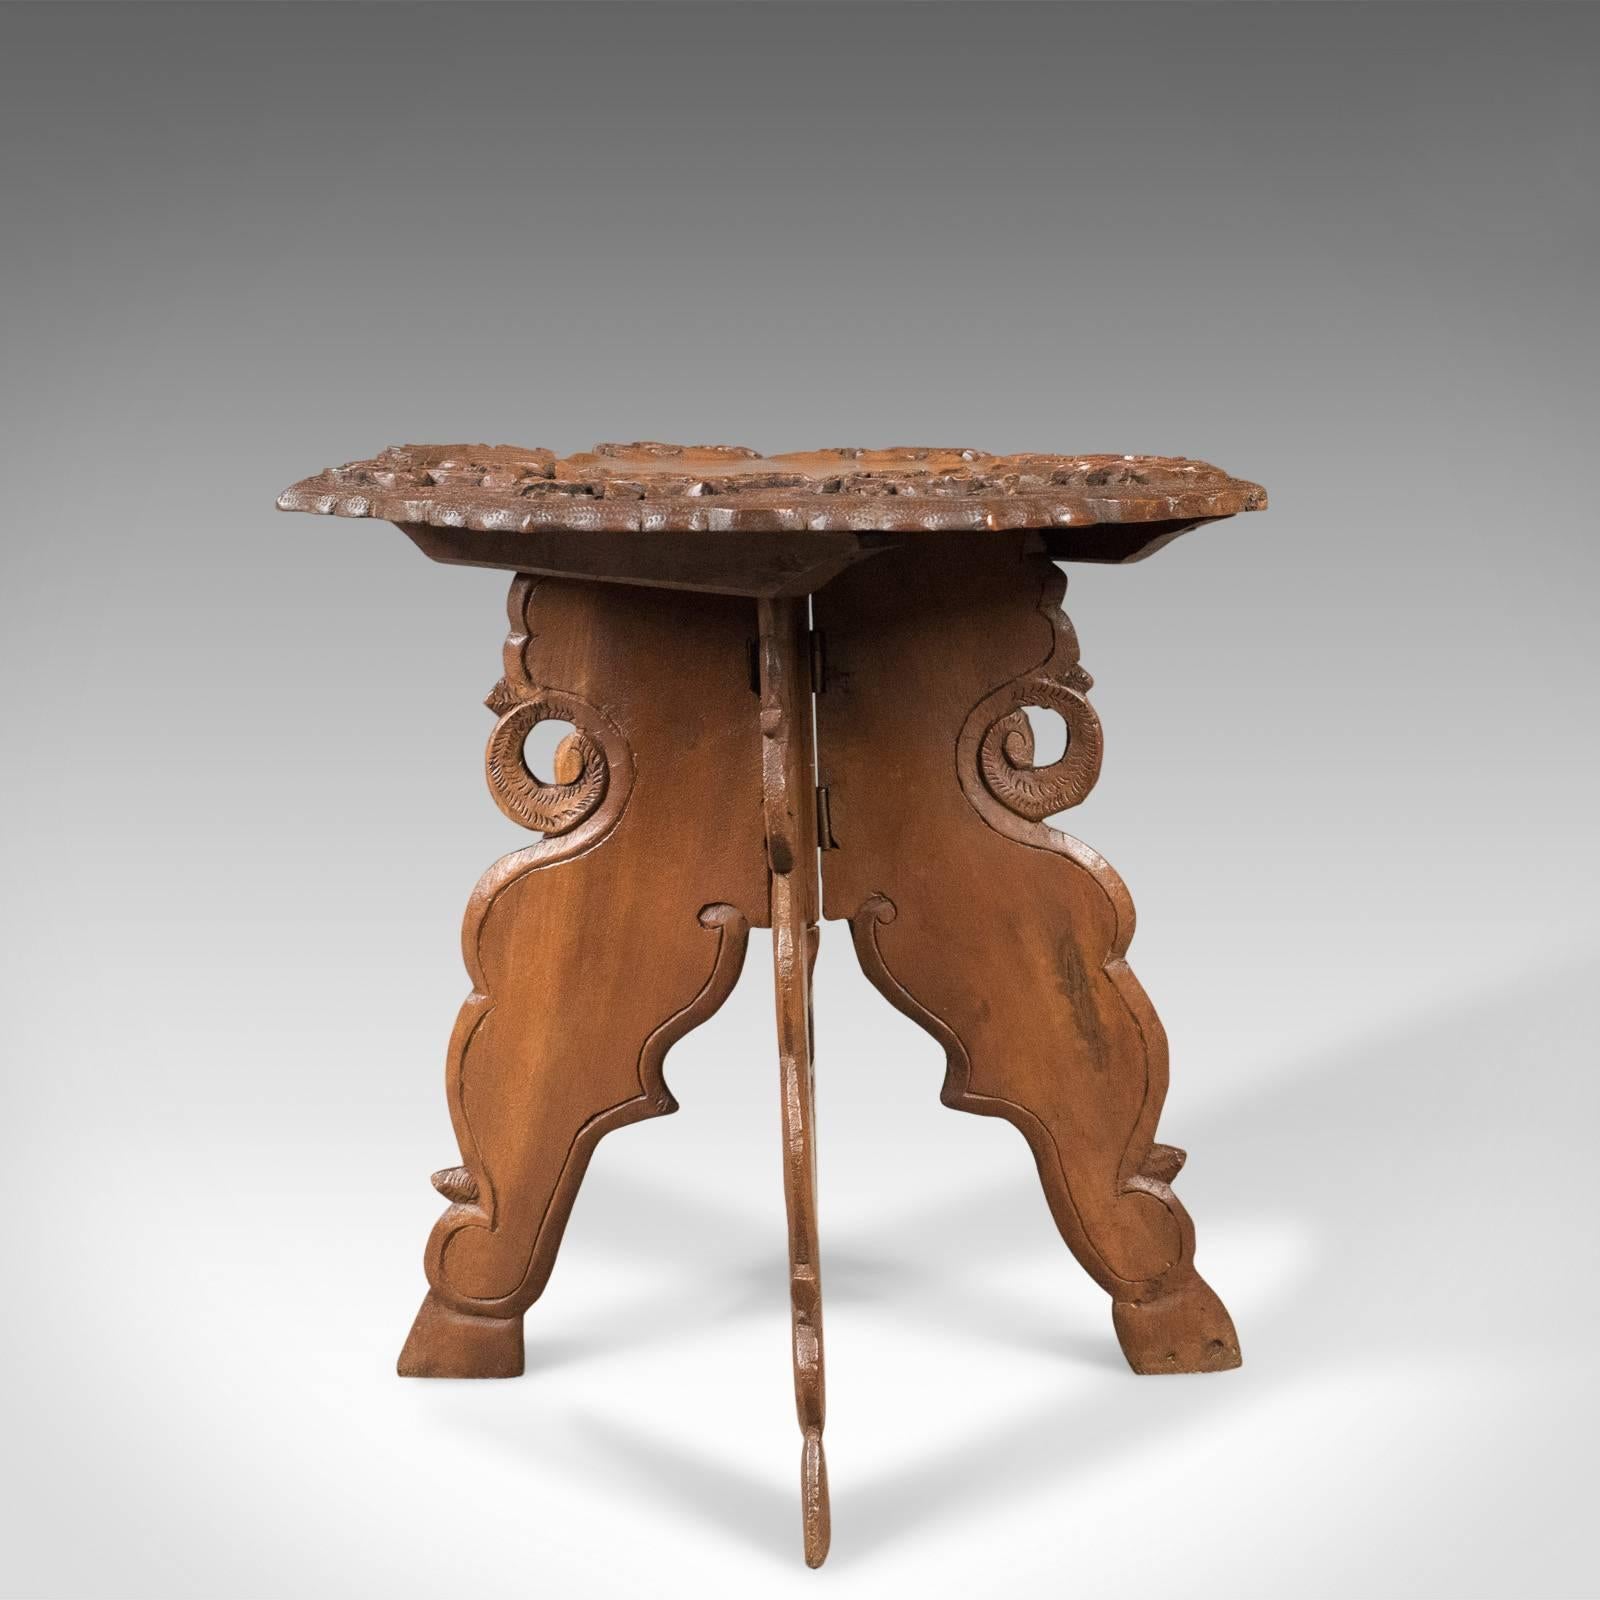 This is an attractive, carved teak, Campaign side table from the mid-20th century.

Central, ribbon edged tabletop with good grain detail
Broad, carved border displaying floral sprays
Outer shaped edge of octagonal form

Fixed legs splayed for